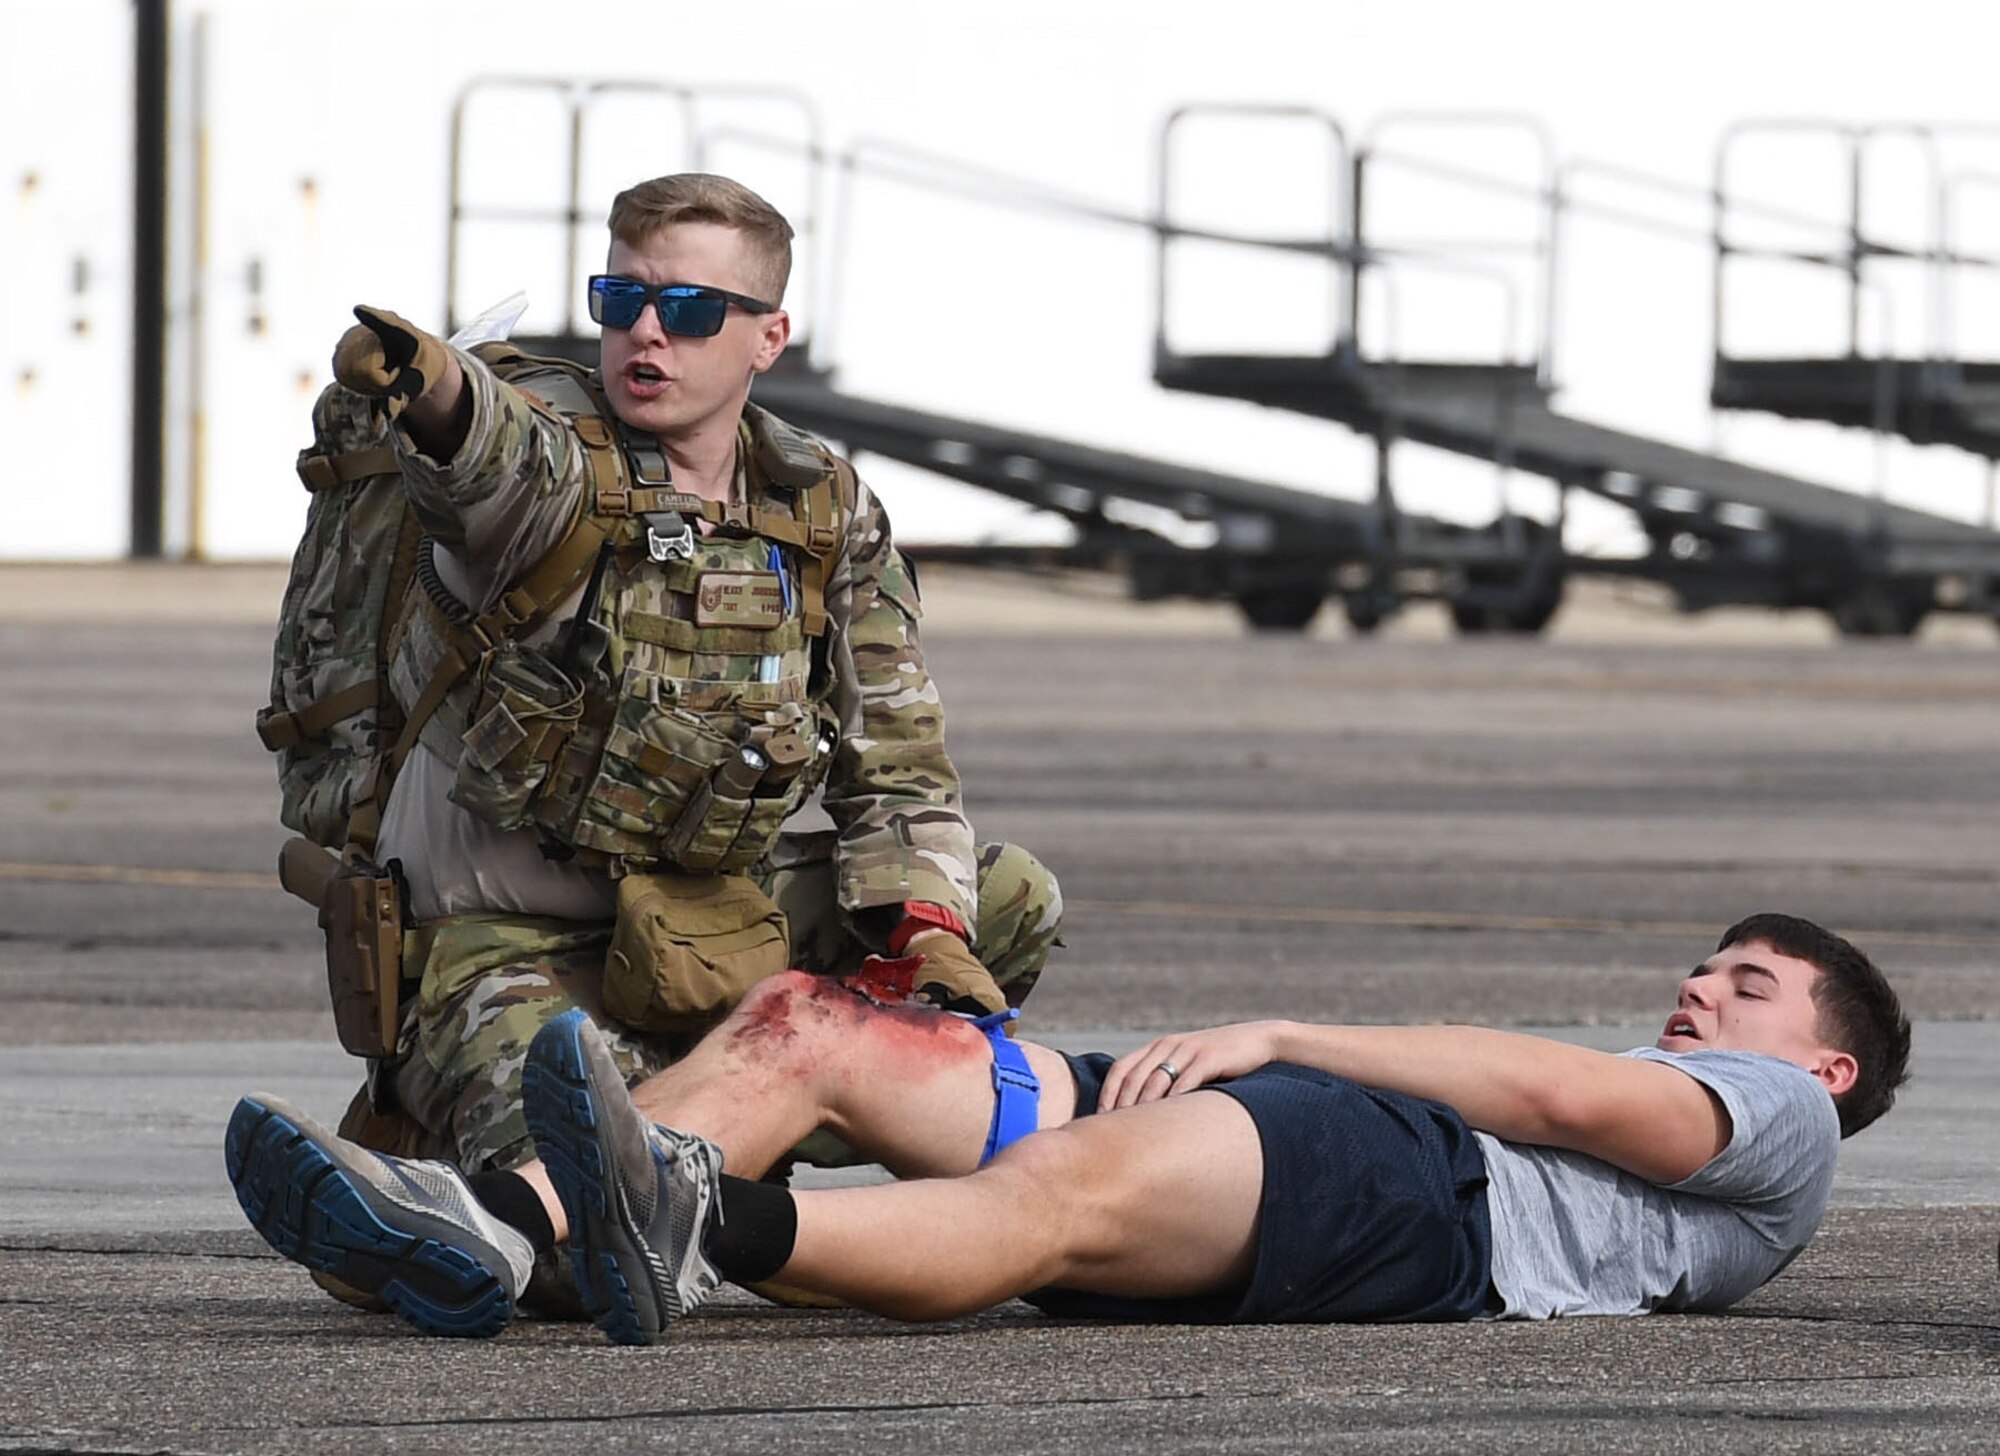 U.S. Air Force Tech. Sgt. Blake Johnson, 81st Security Forces Squadron training NCO in charge, administers triage on Airman Cameron Raney, 336th Training Squadron student, during the aircraft mishap exercise at Keesler Air Force Base, Mississippi, March 16, 2023.